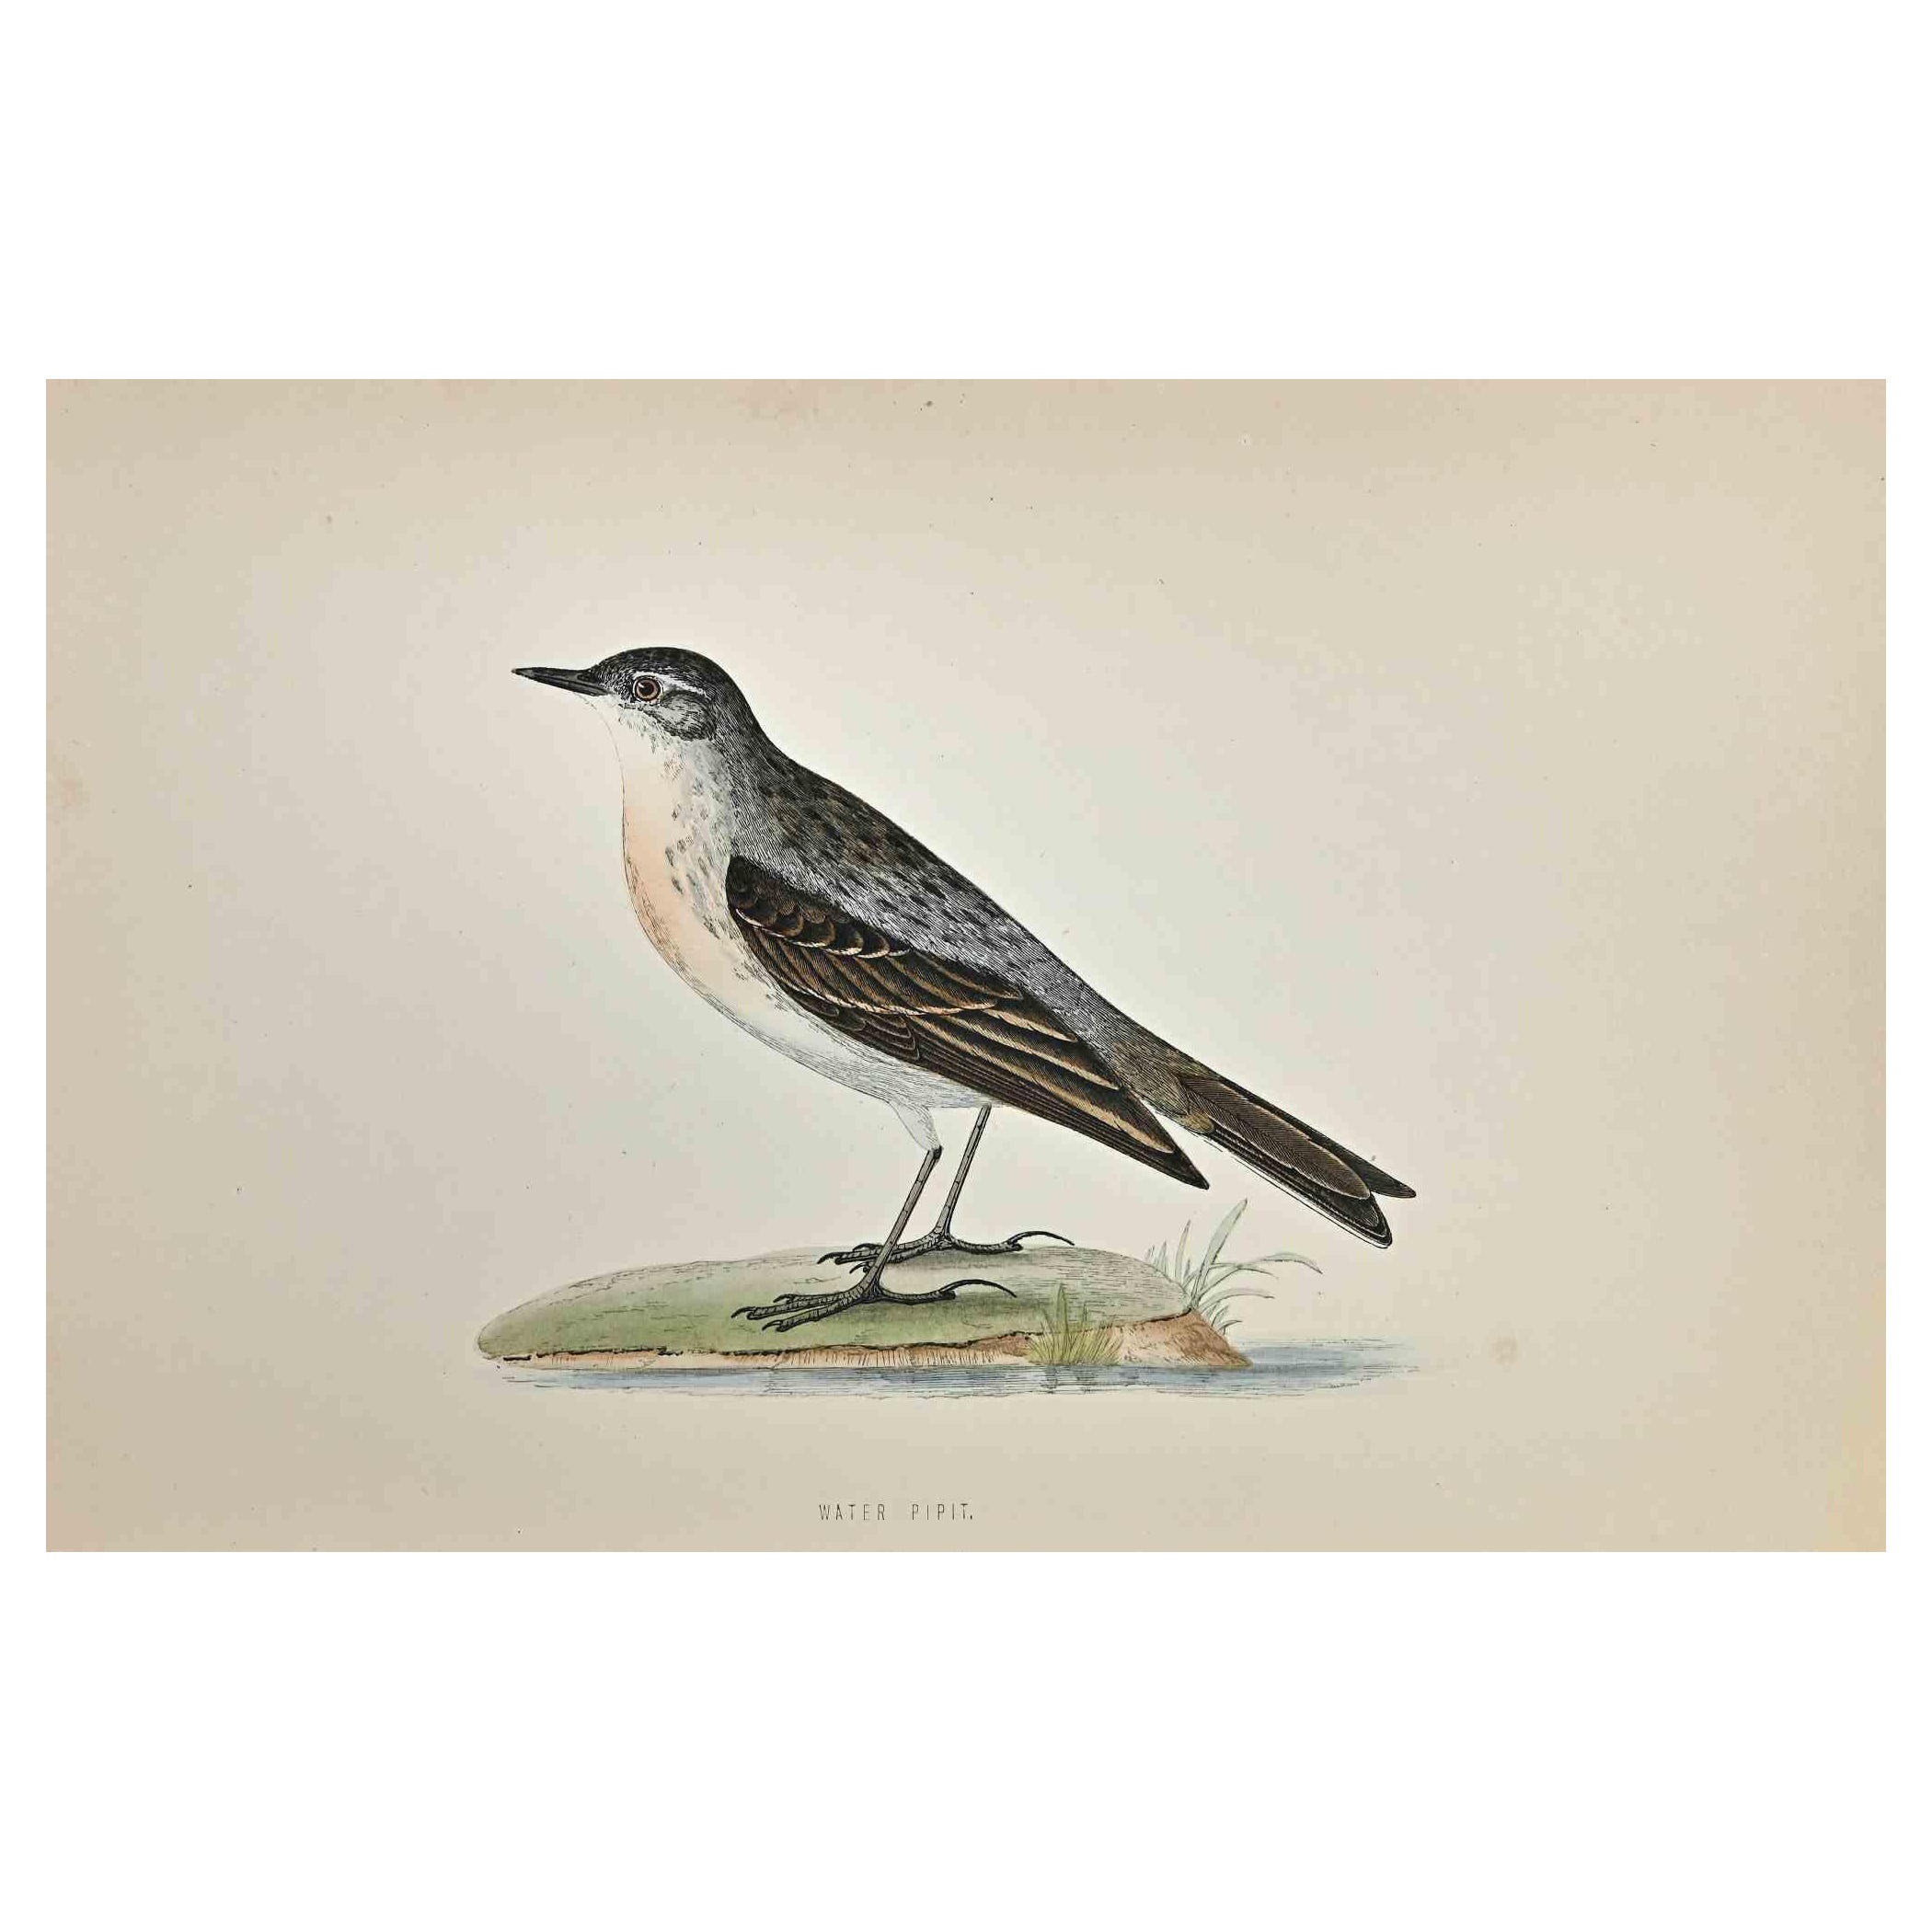 Water Pipit is a modern artwork realized in 1870 by the British artist Alexander Francis Lydon (1836-1917) . 

Woodcut print, hand colored, published by London, Bell & Sons, 1870.  Name of the bird printed in plate. This work is part of a print